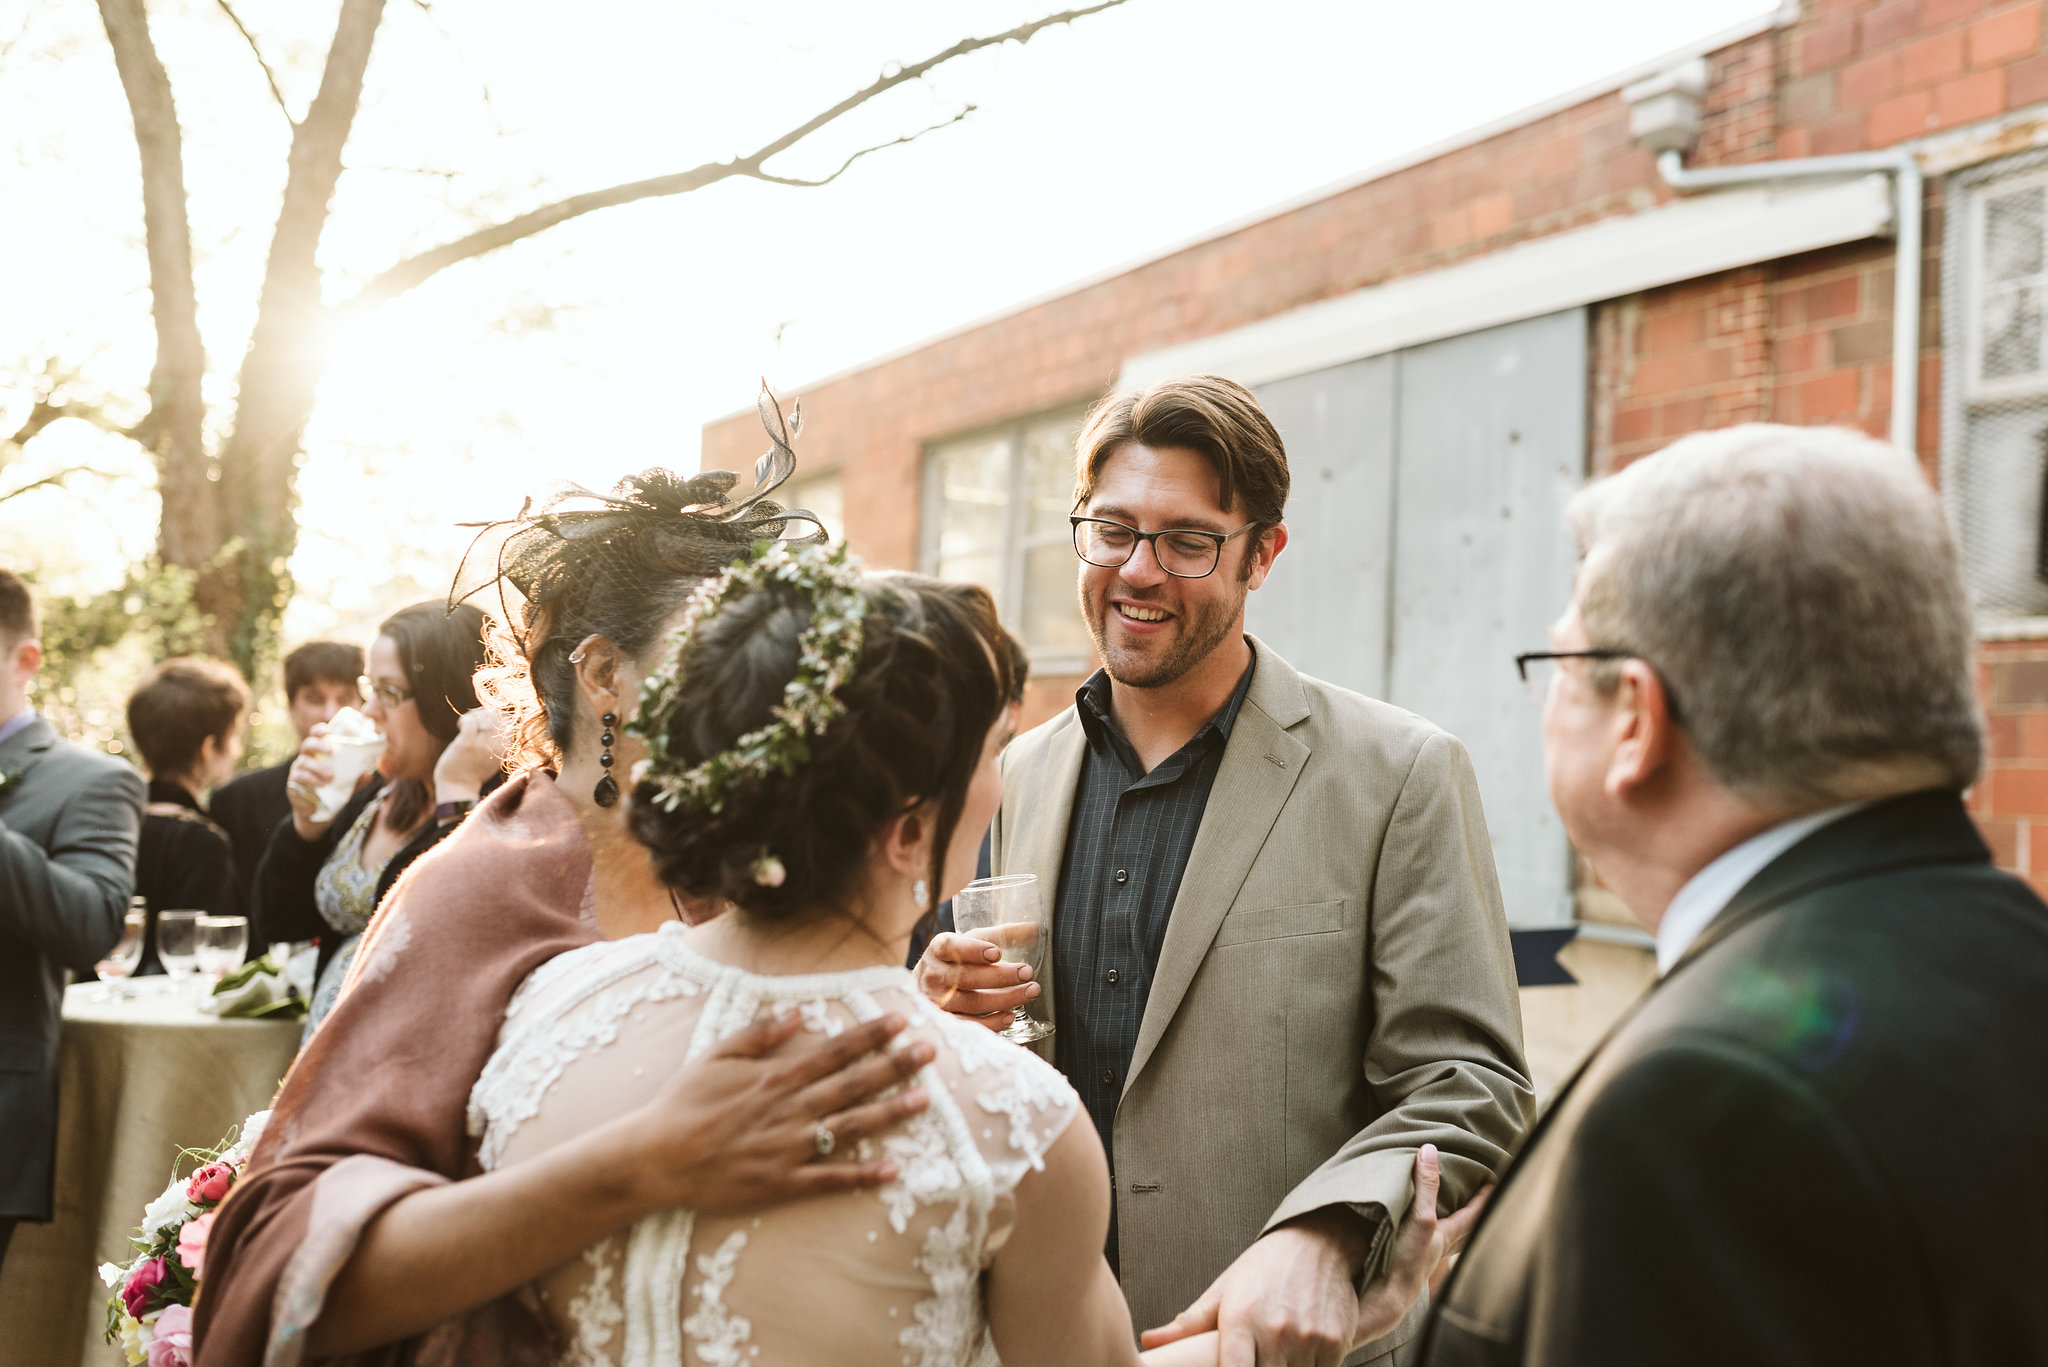  Baltimore, Maryland Wedding Photographer, Hampden, Eco-Friendly, Green, The Elm, Simple and Classic, Vintage, Bride Chatting with Friends at Reception 